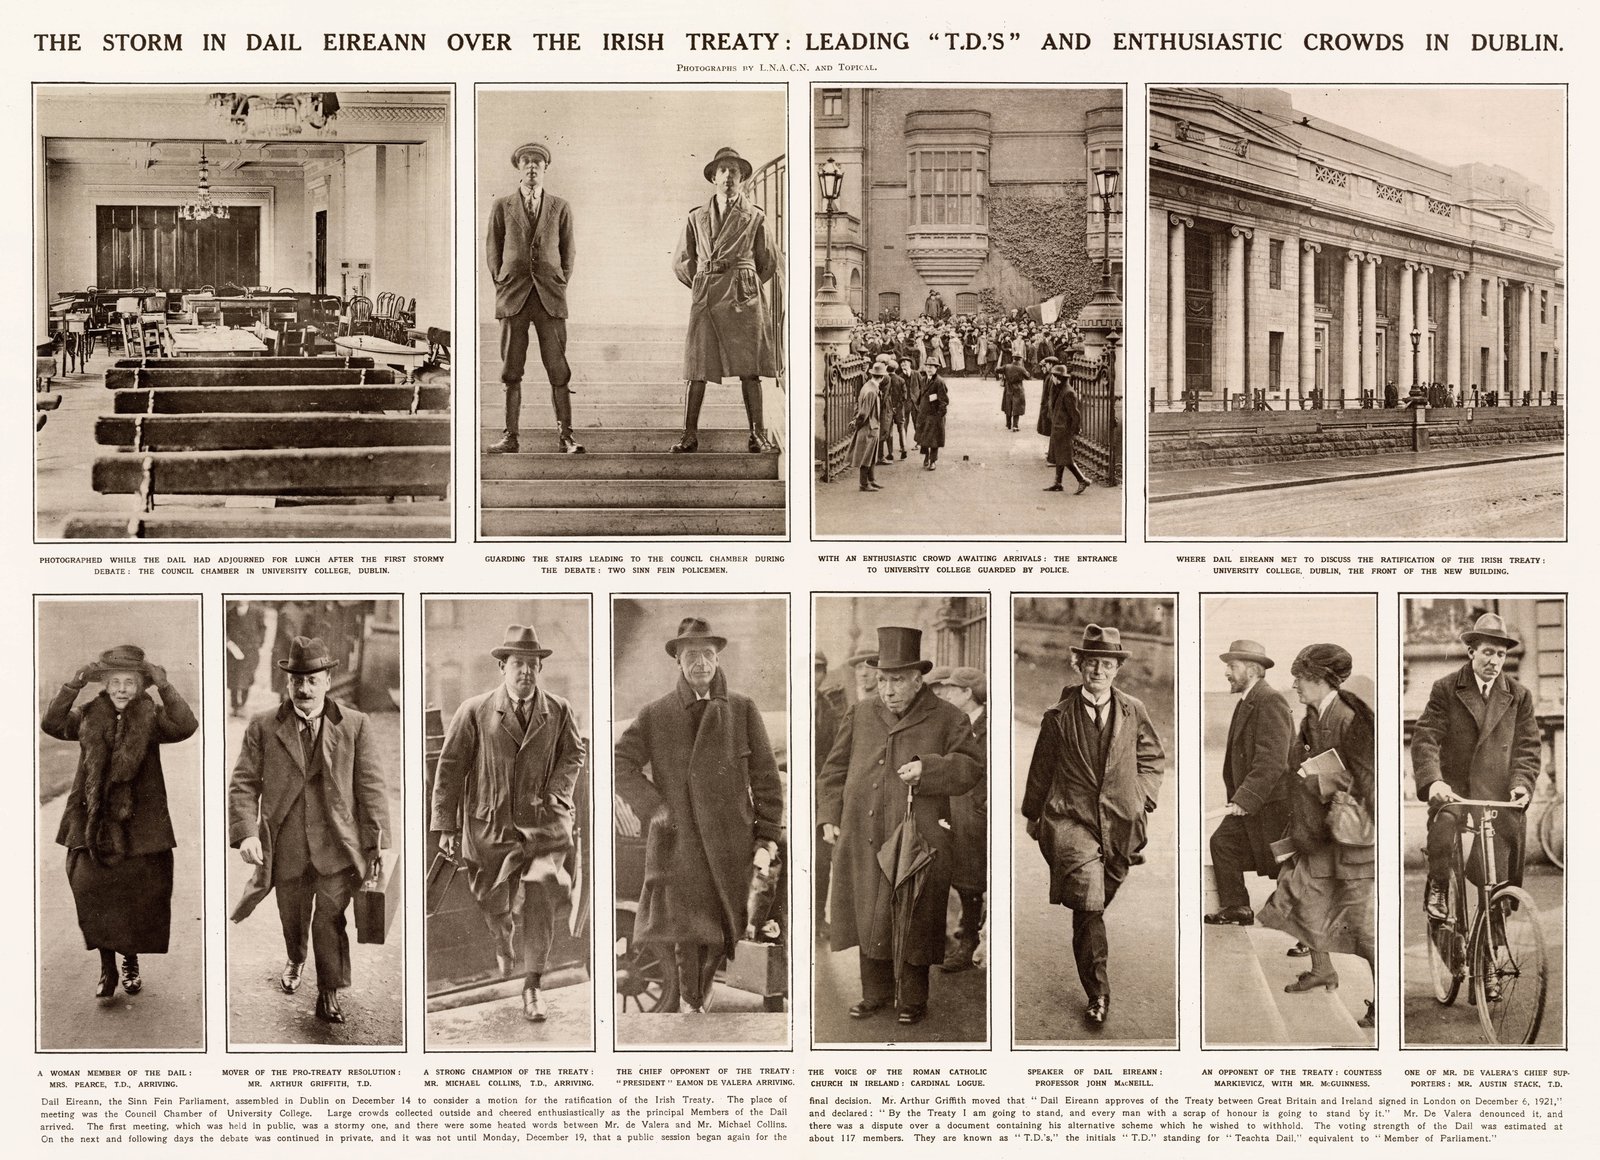 Image - The British media kept a close eye on the debate. This illustrated London News montage of photos from outside and inside the chamber, includes a very rare sight of the Republican Police, who provided security during the debates. Credit: Mary Evans Library